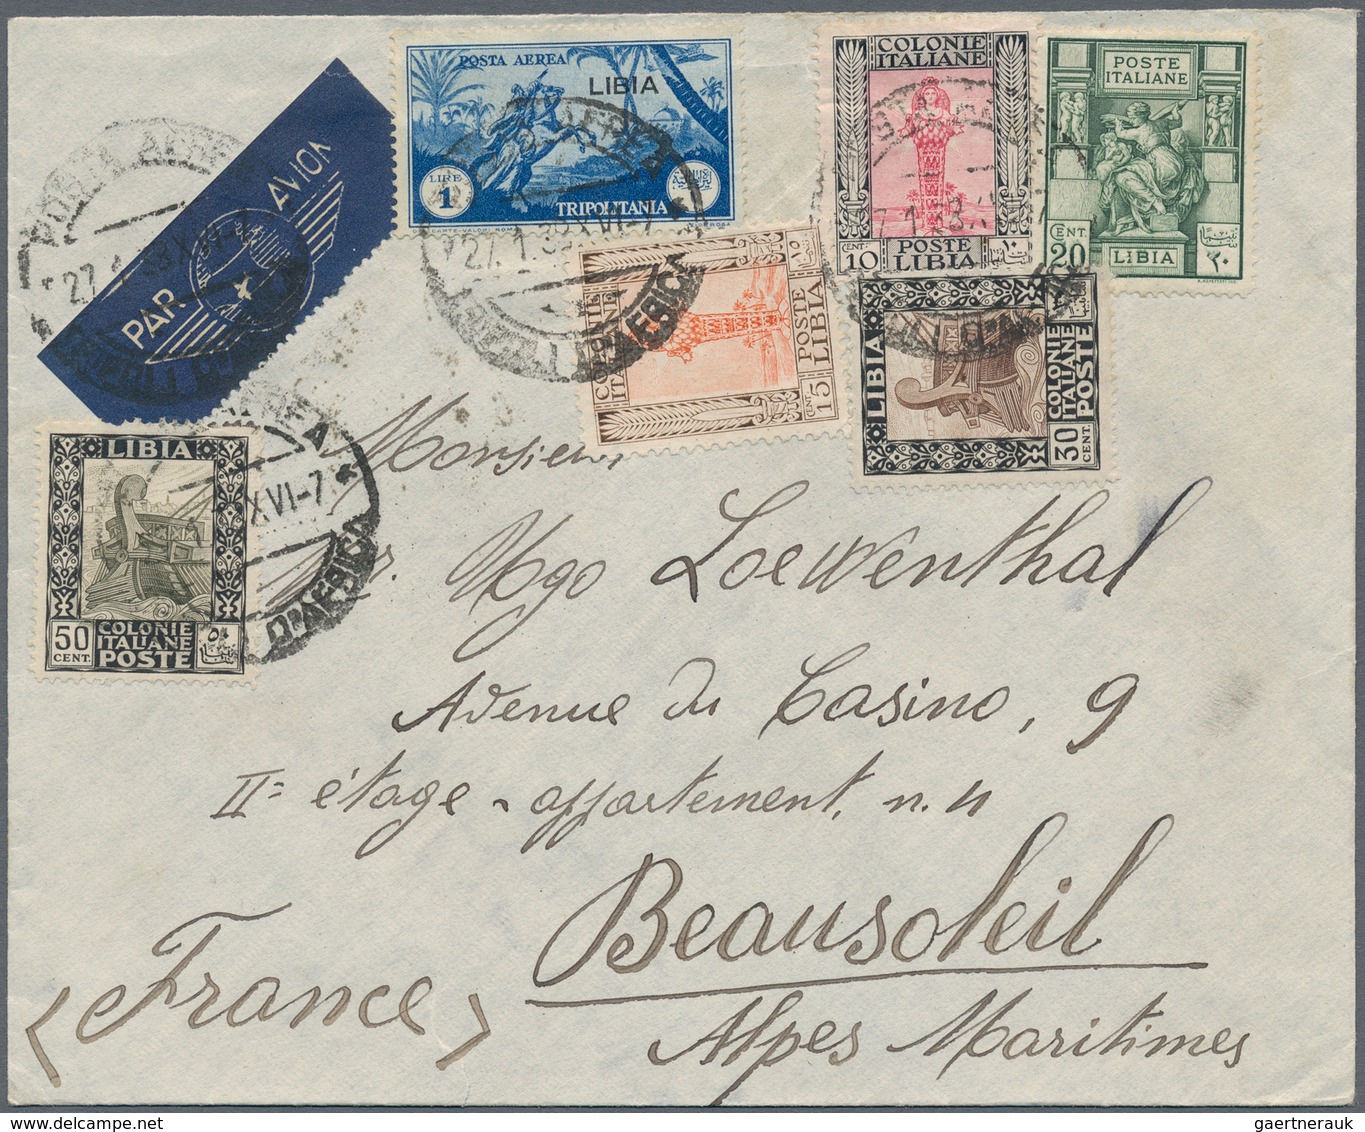 Libyen: 1912/1990 (ca.), holding of apprx. 150 covers/cards from some Italian period incl. a 1912 po